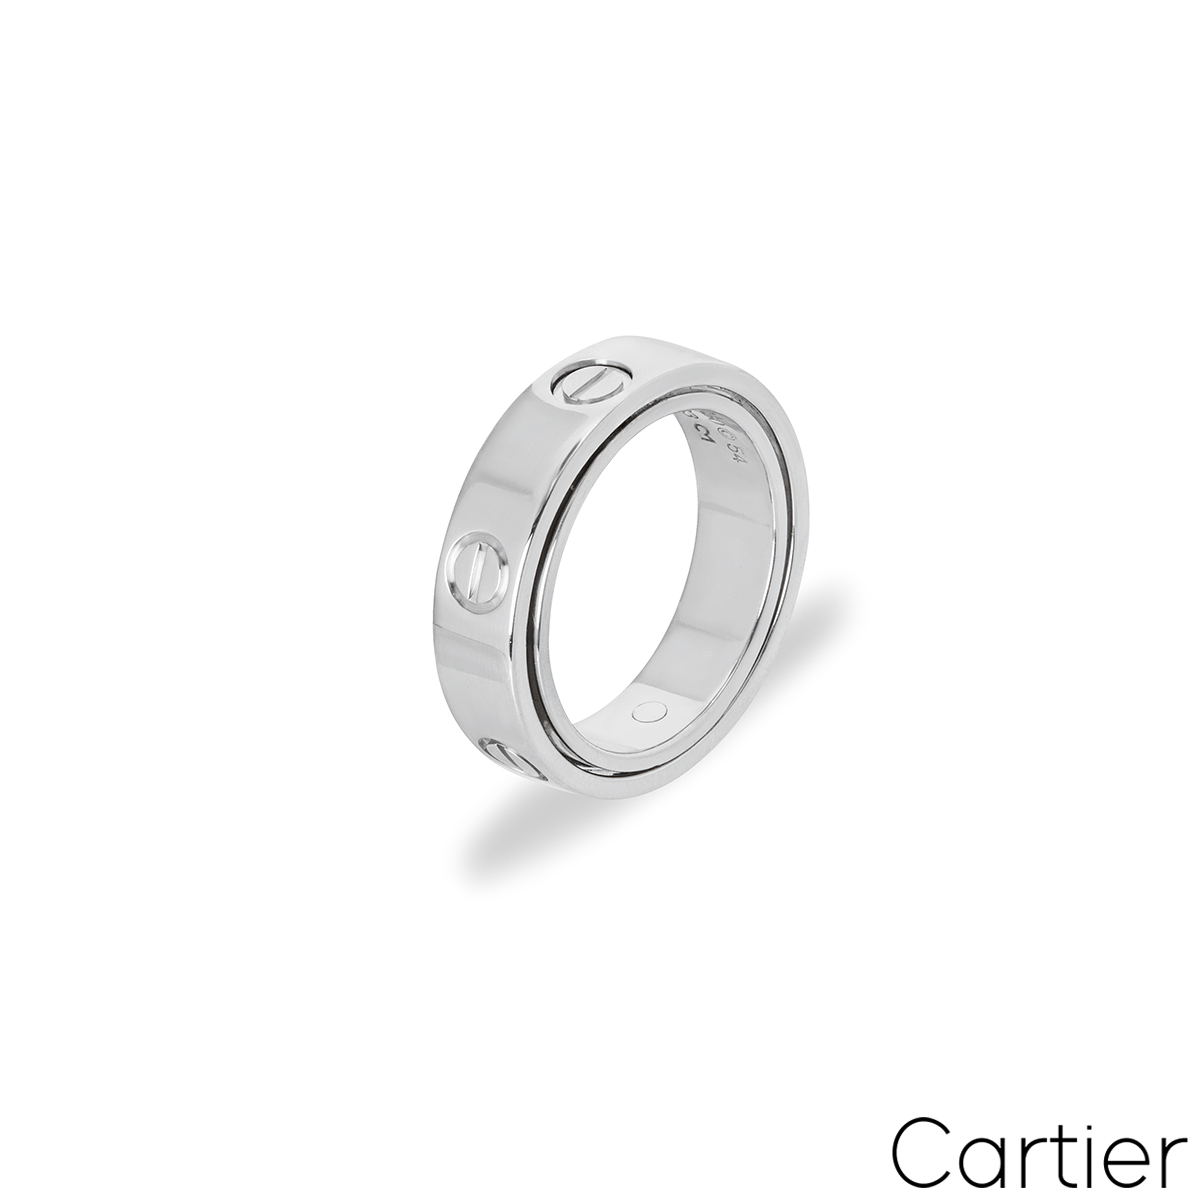 Cartier White Gold Plain Spicy Love Ring Size 54